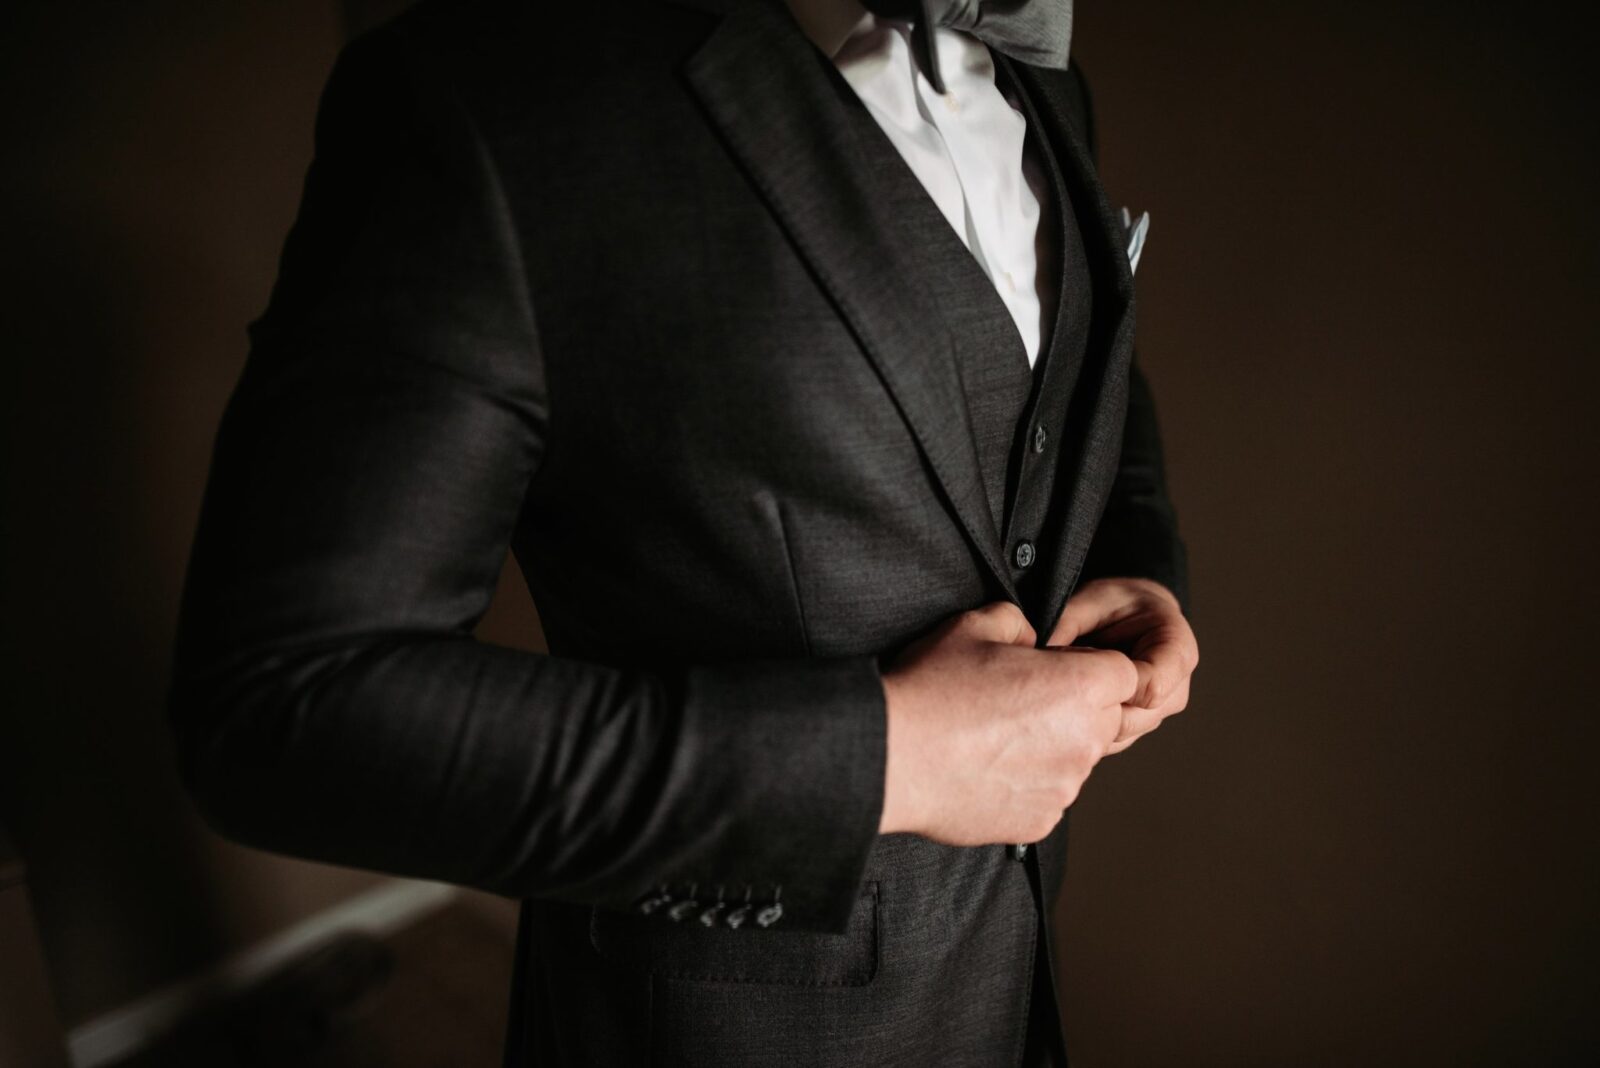 7 TIPS ALL ABOUT CHOOSING A SUIT FOR YOUR WEDDING DAY